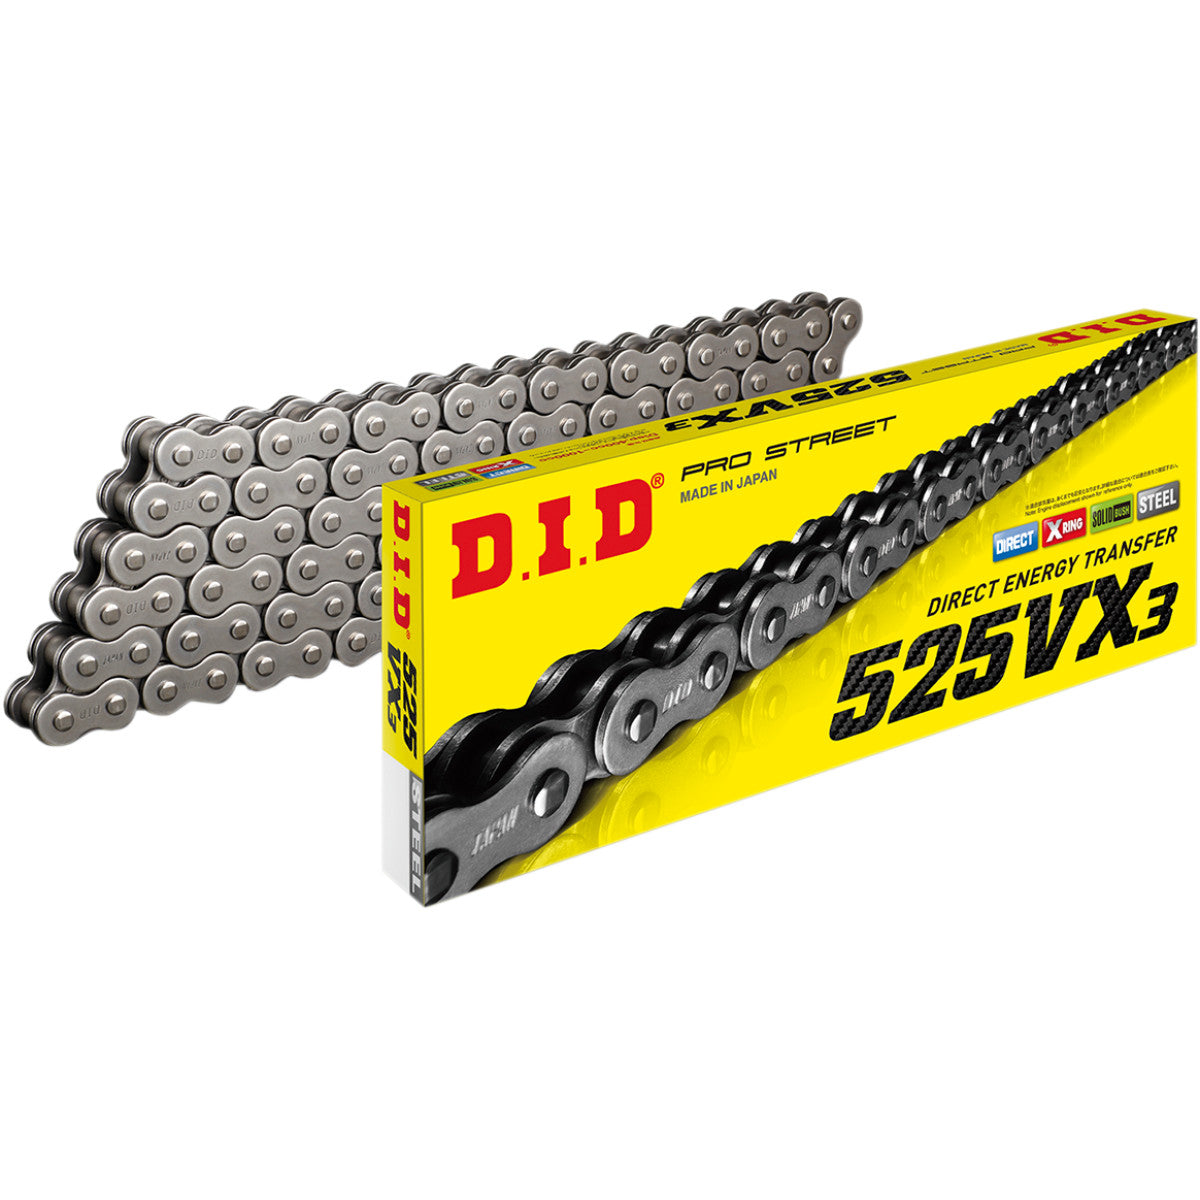 DID Motorcycle Chain Kits | Bikewise Motorcycle Accessories